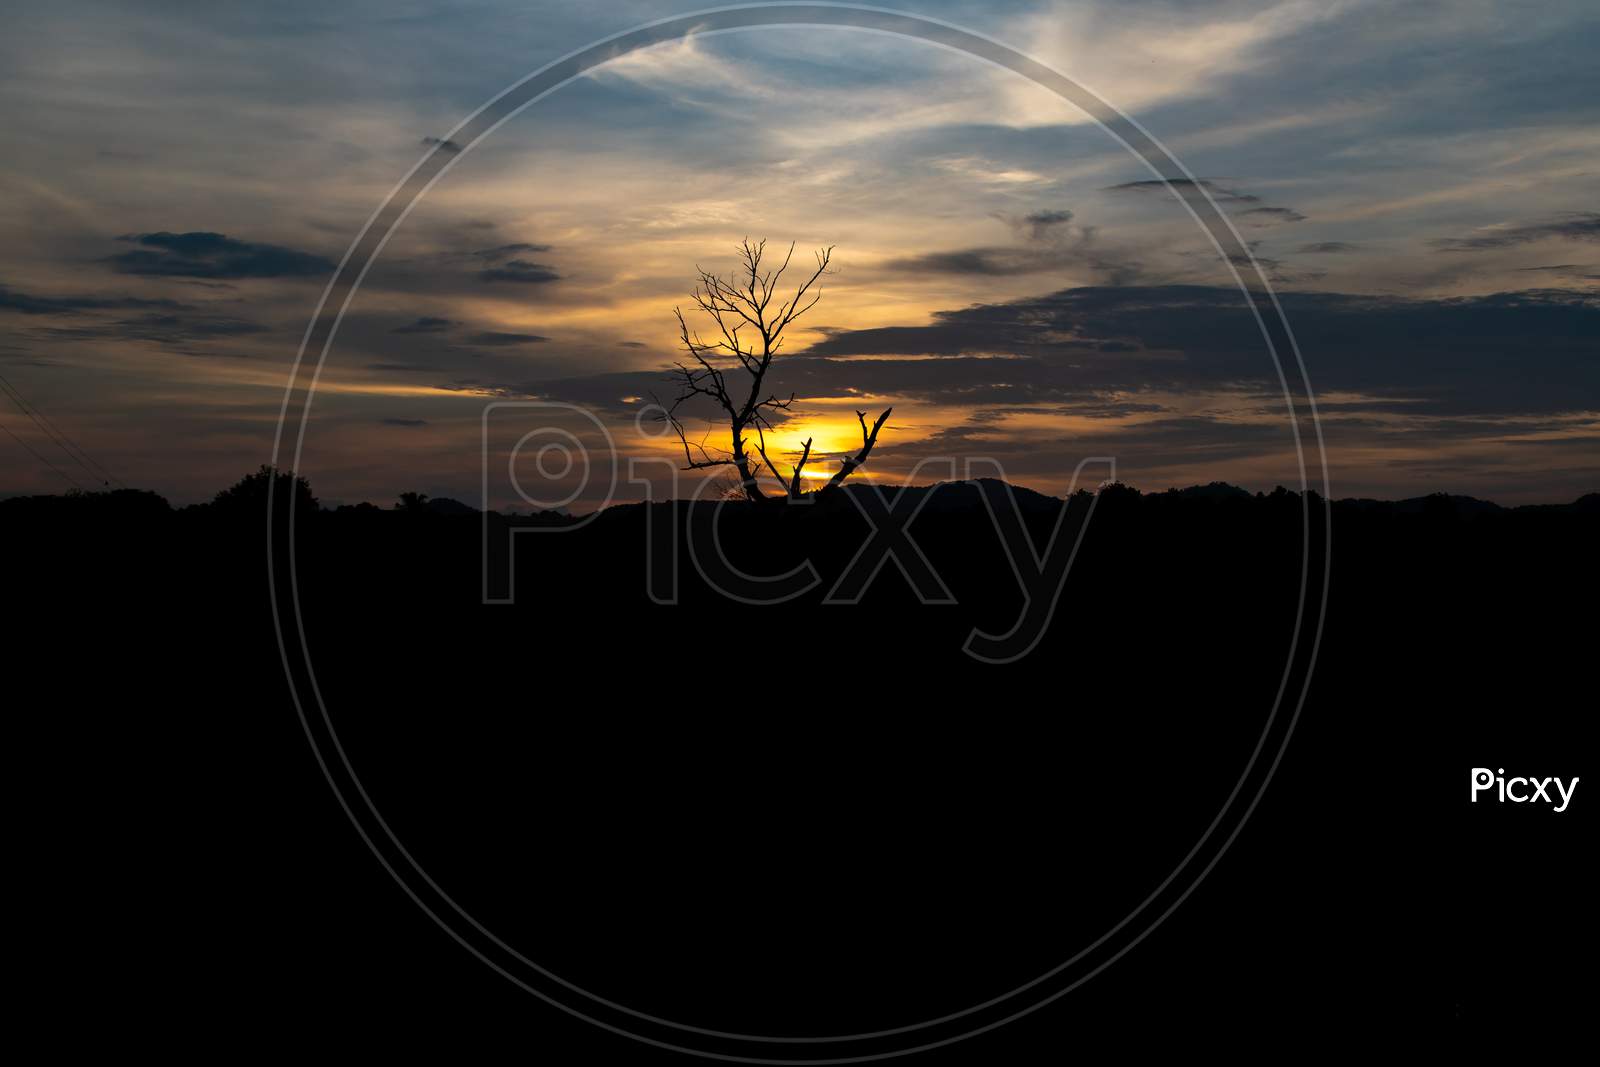 sunset with silhouetted tree